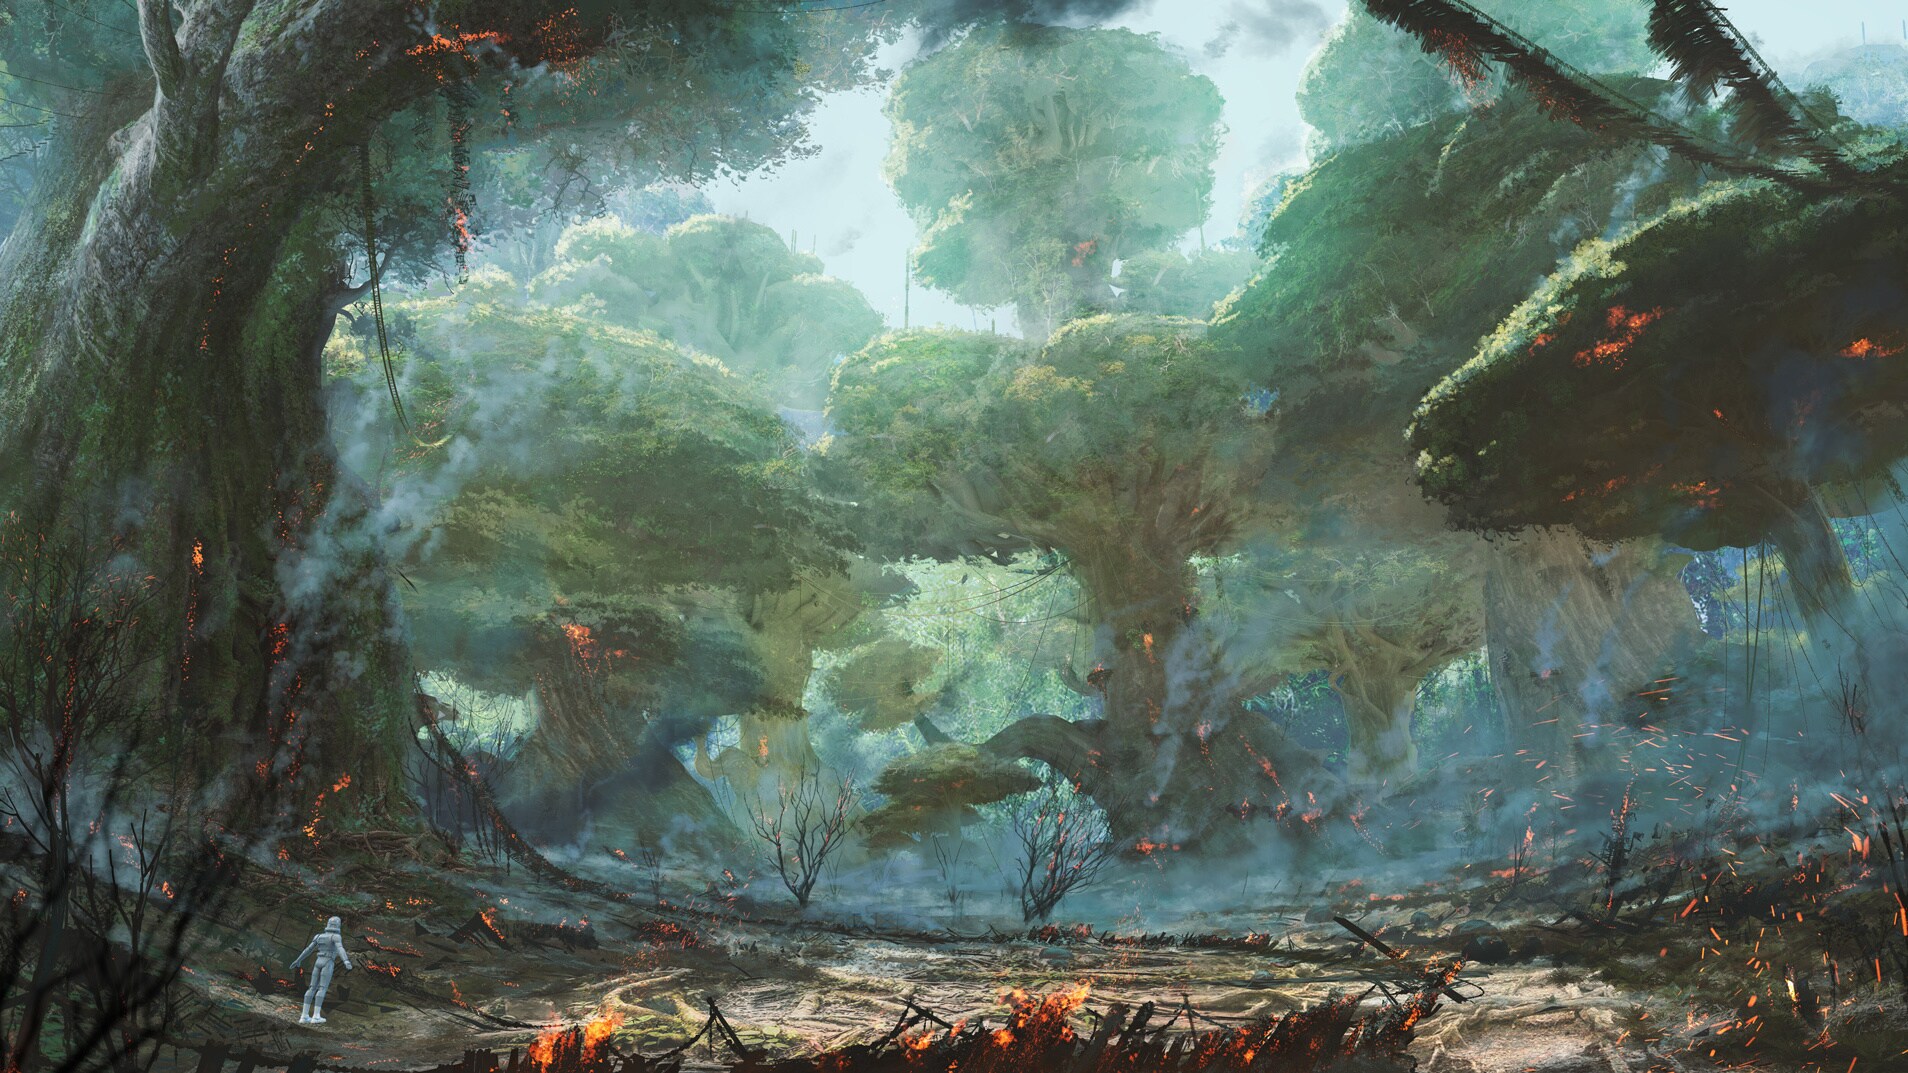 Kashyyyk concept art by James Moore